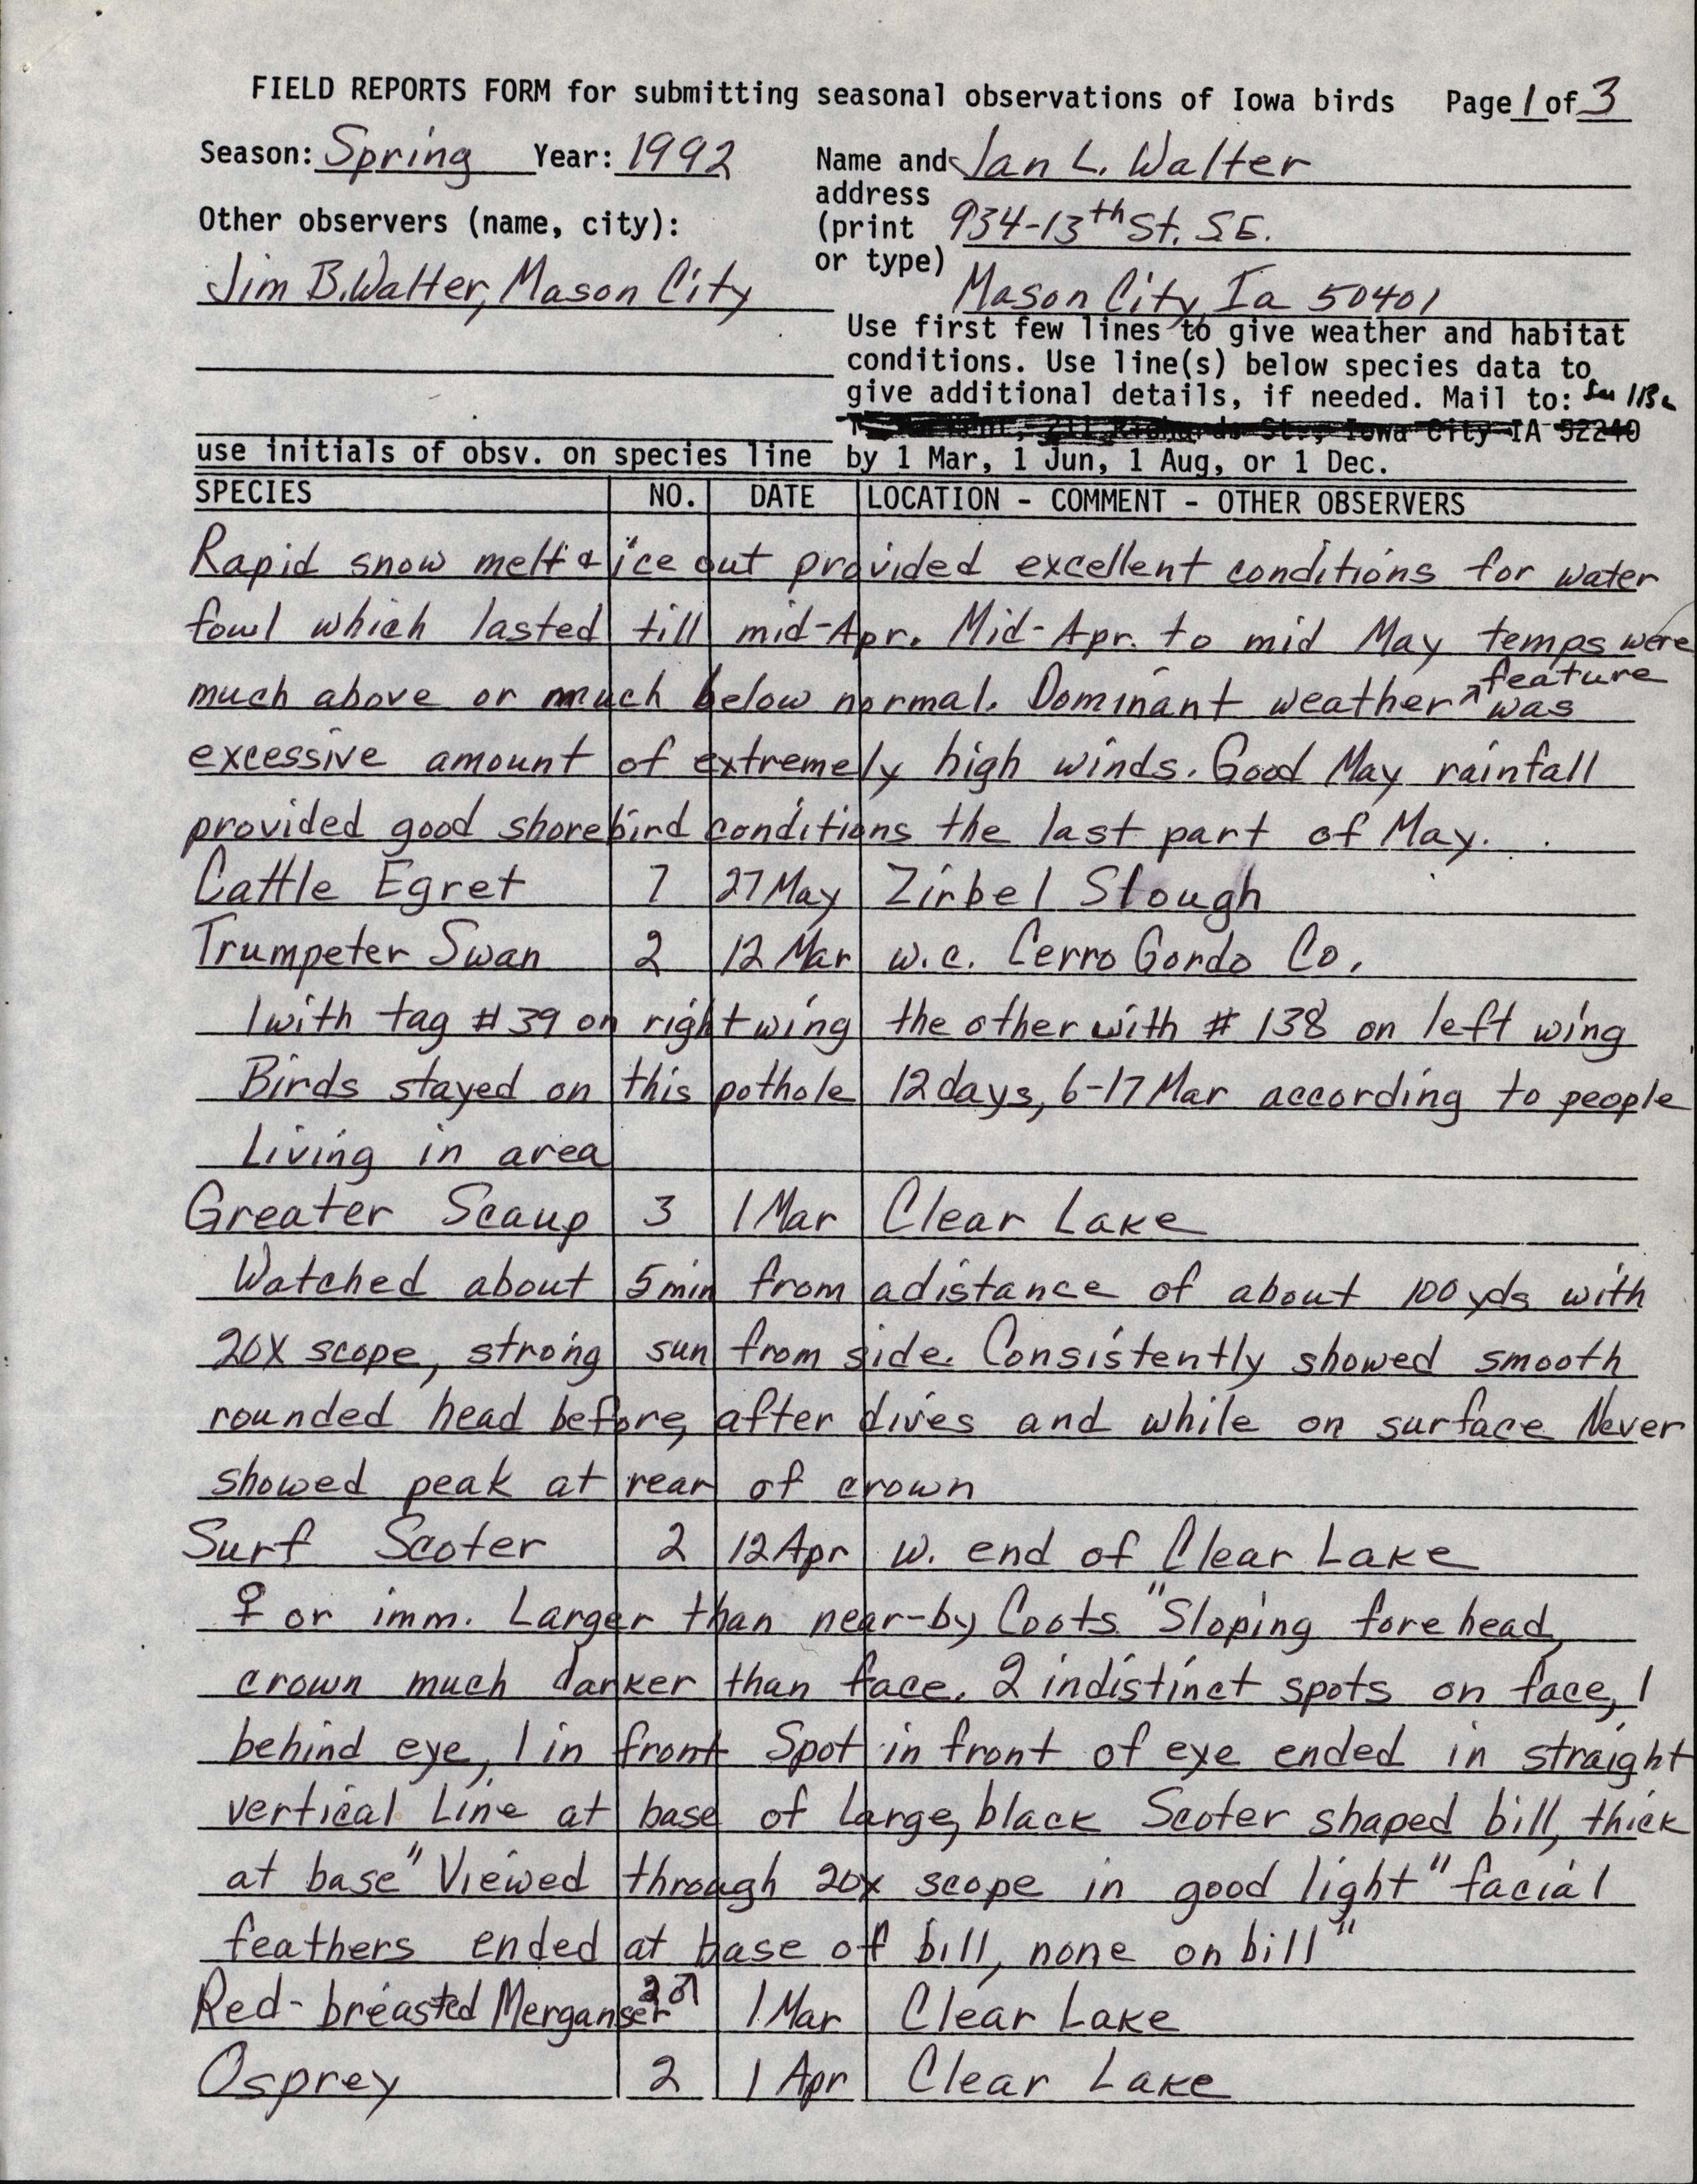 Field reports form for submitting seasonal observations of Iowa birds, Jan L. Walter, spring 1992